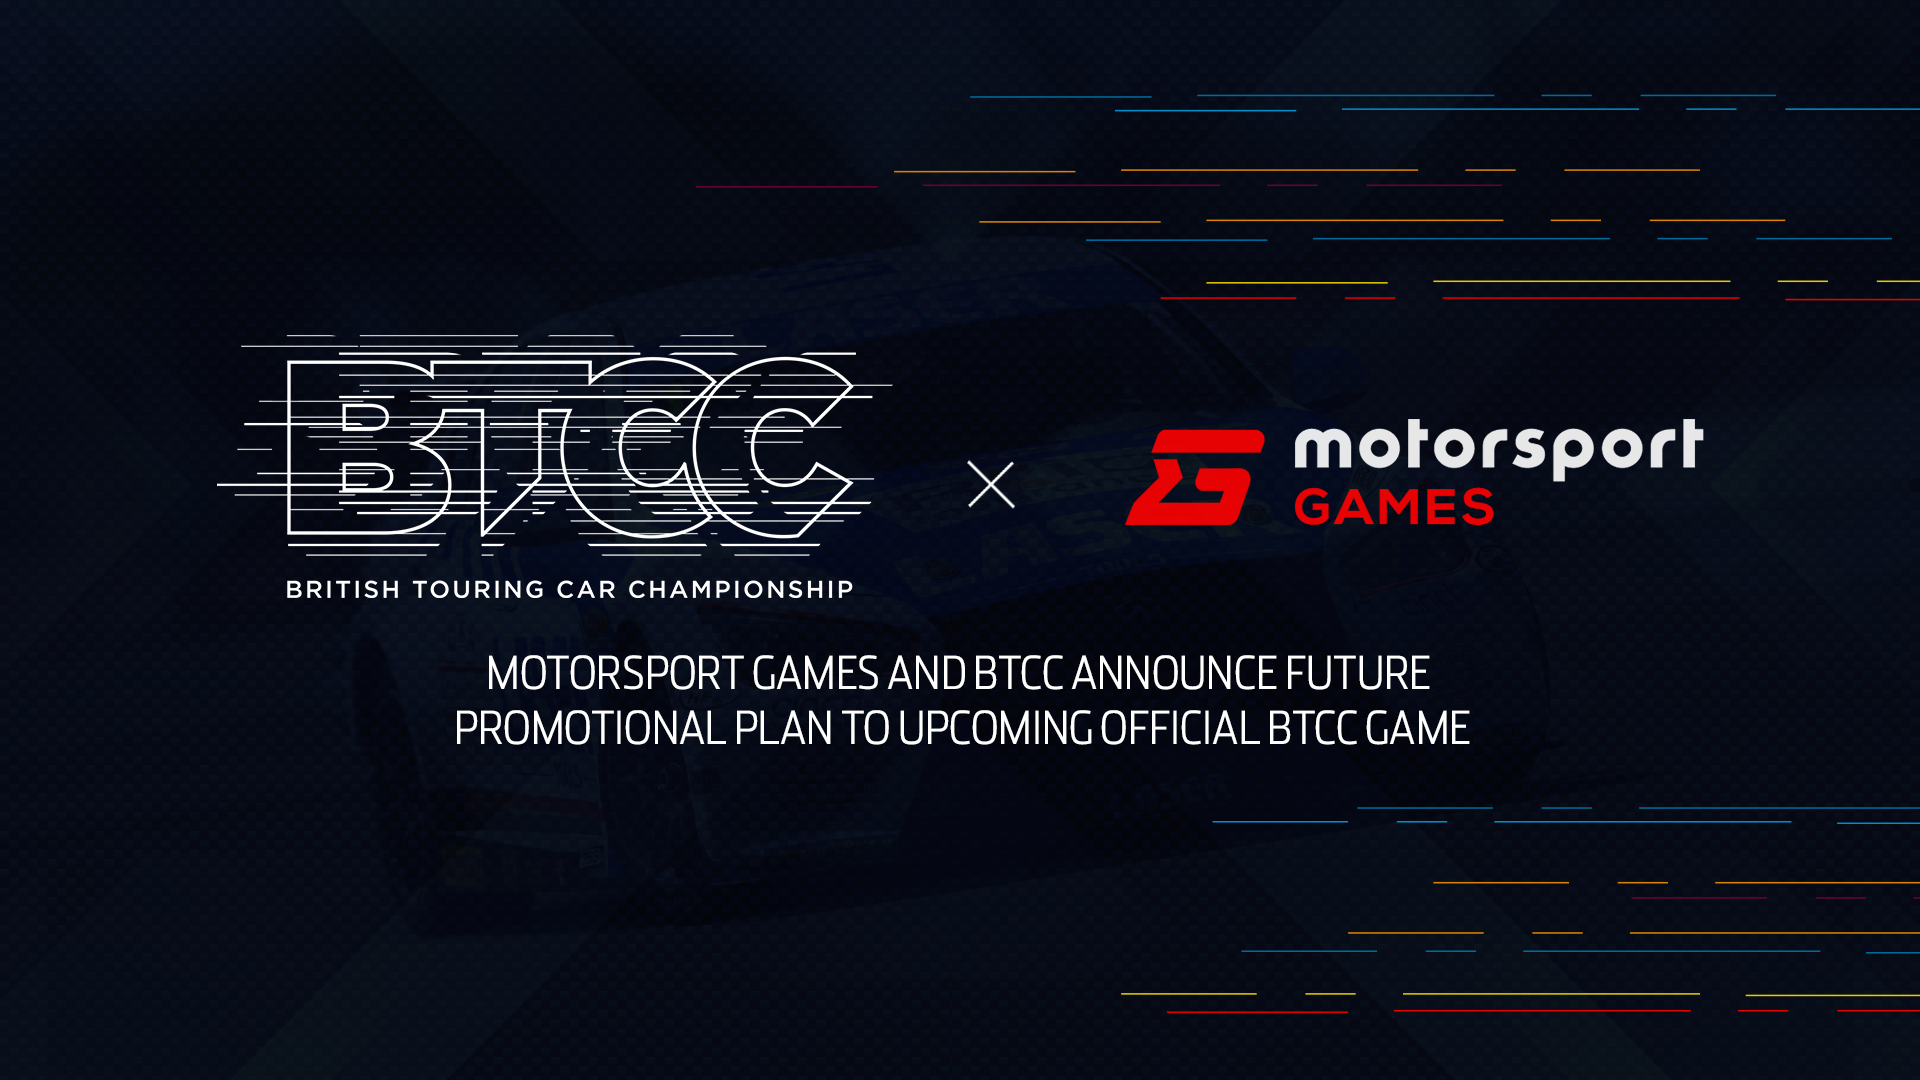 Motorsport Games and BTCC Announce Future Promotional Plan to Upcoming Official BTCC Game